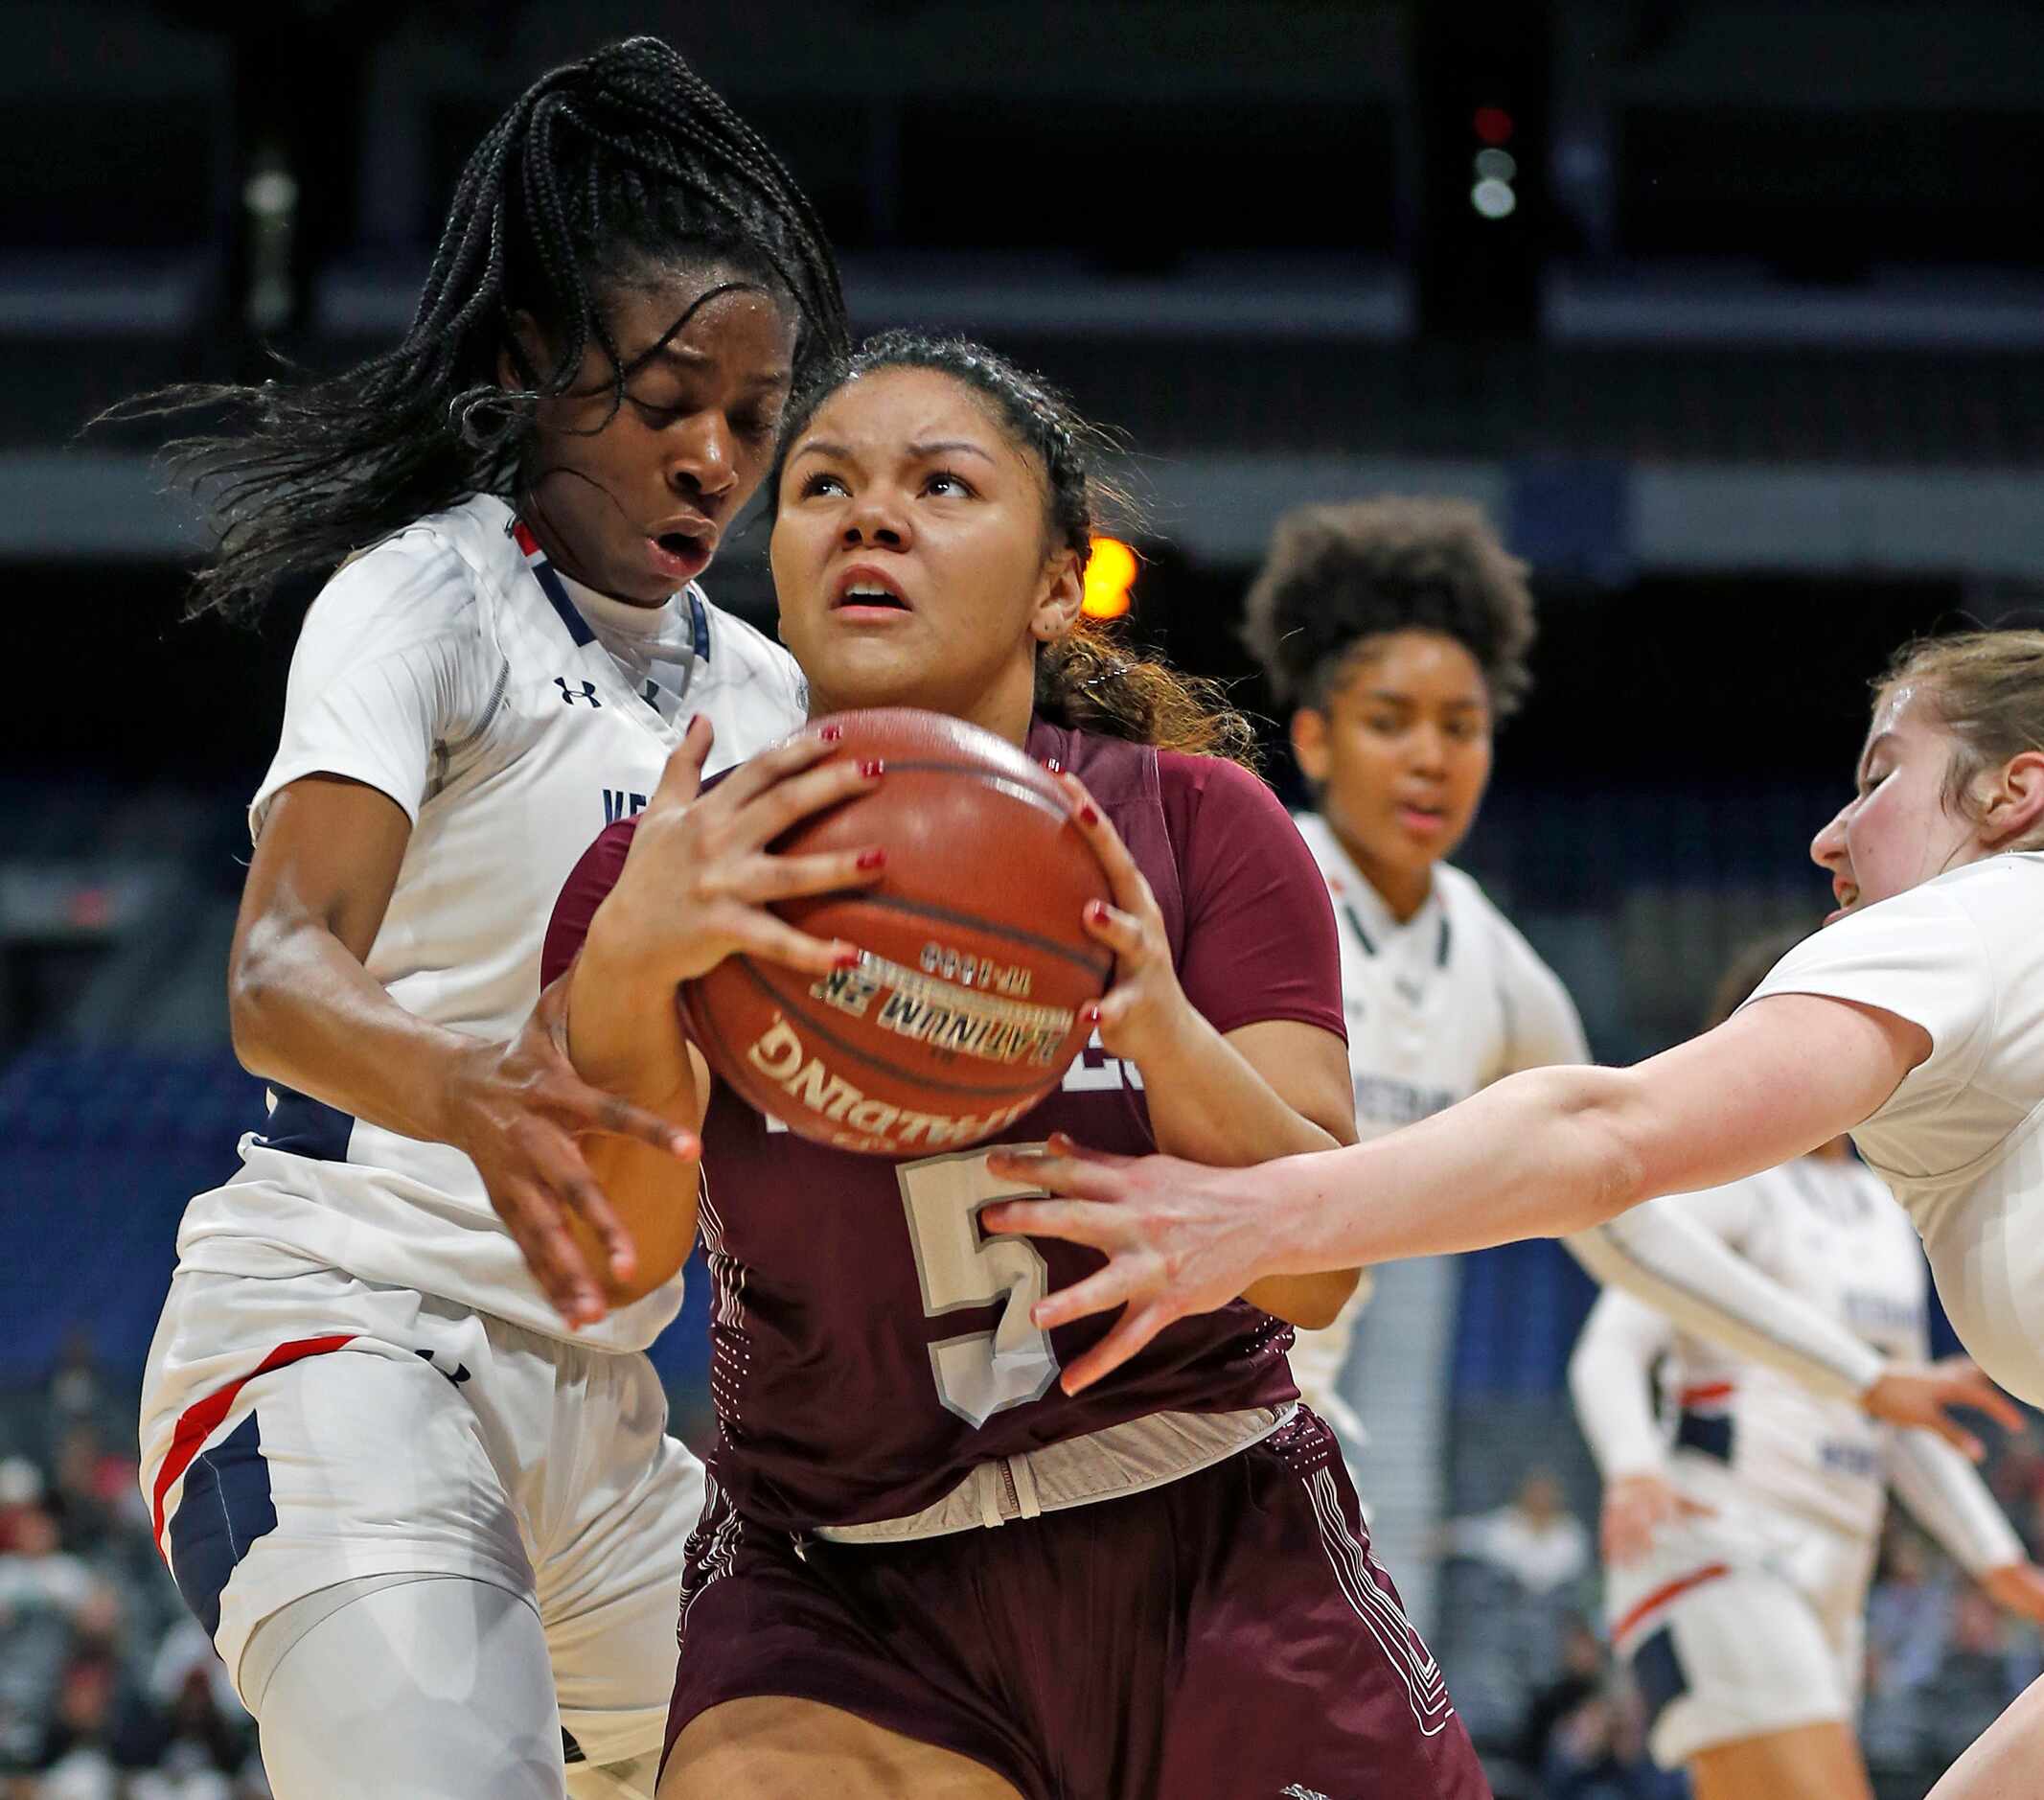 Mansfield Timberview guard Nina Milliner #5 drives to the basket against SA Veteran in a 5A...